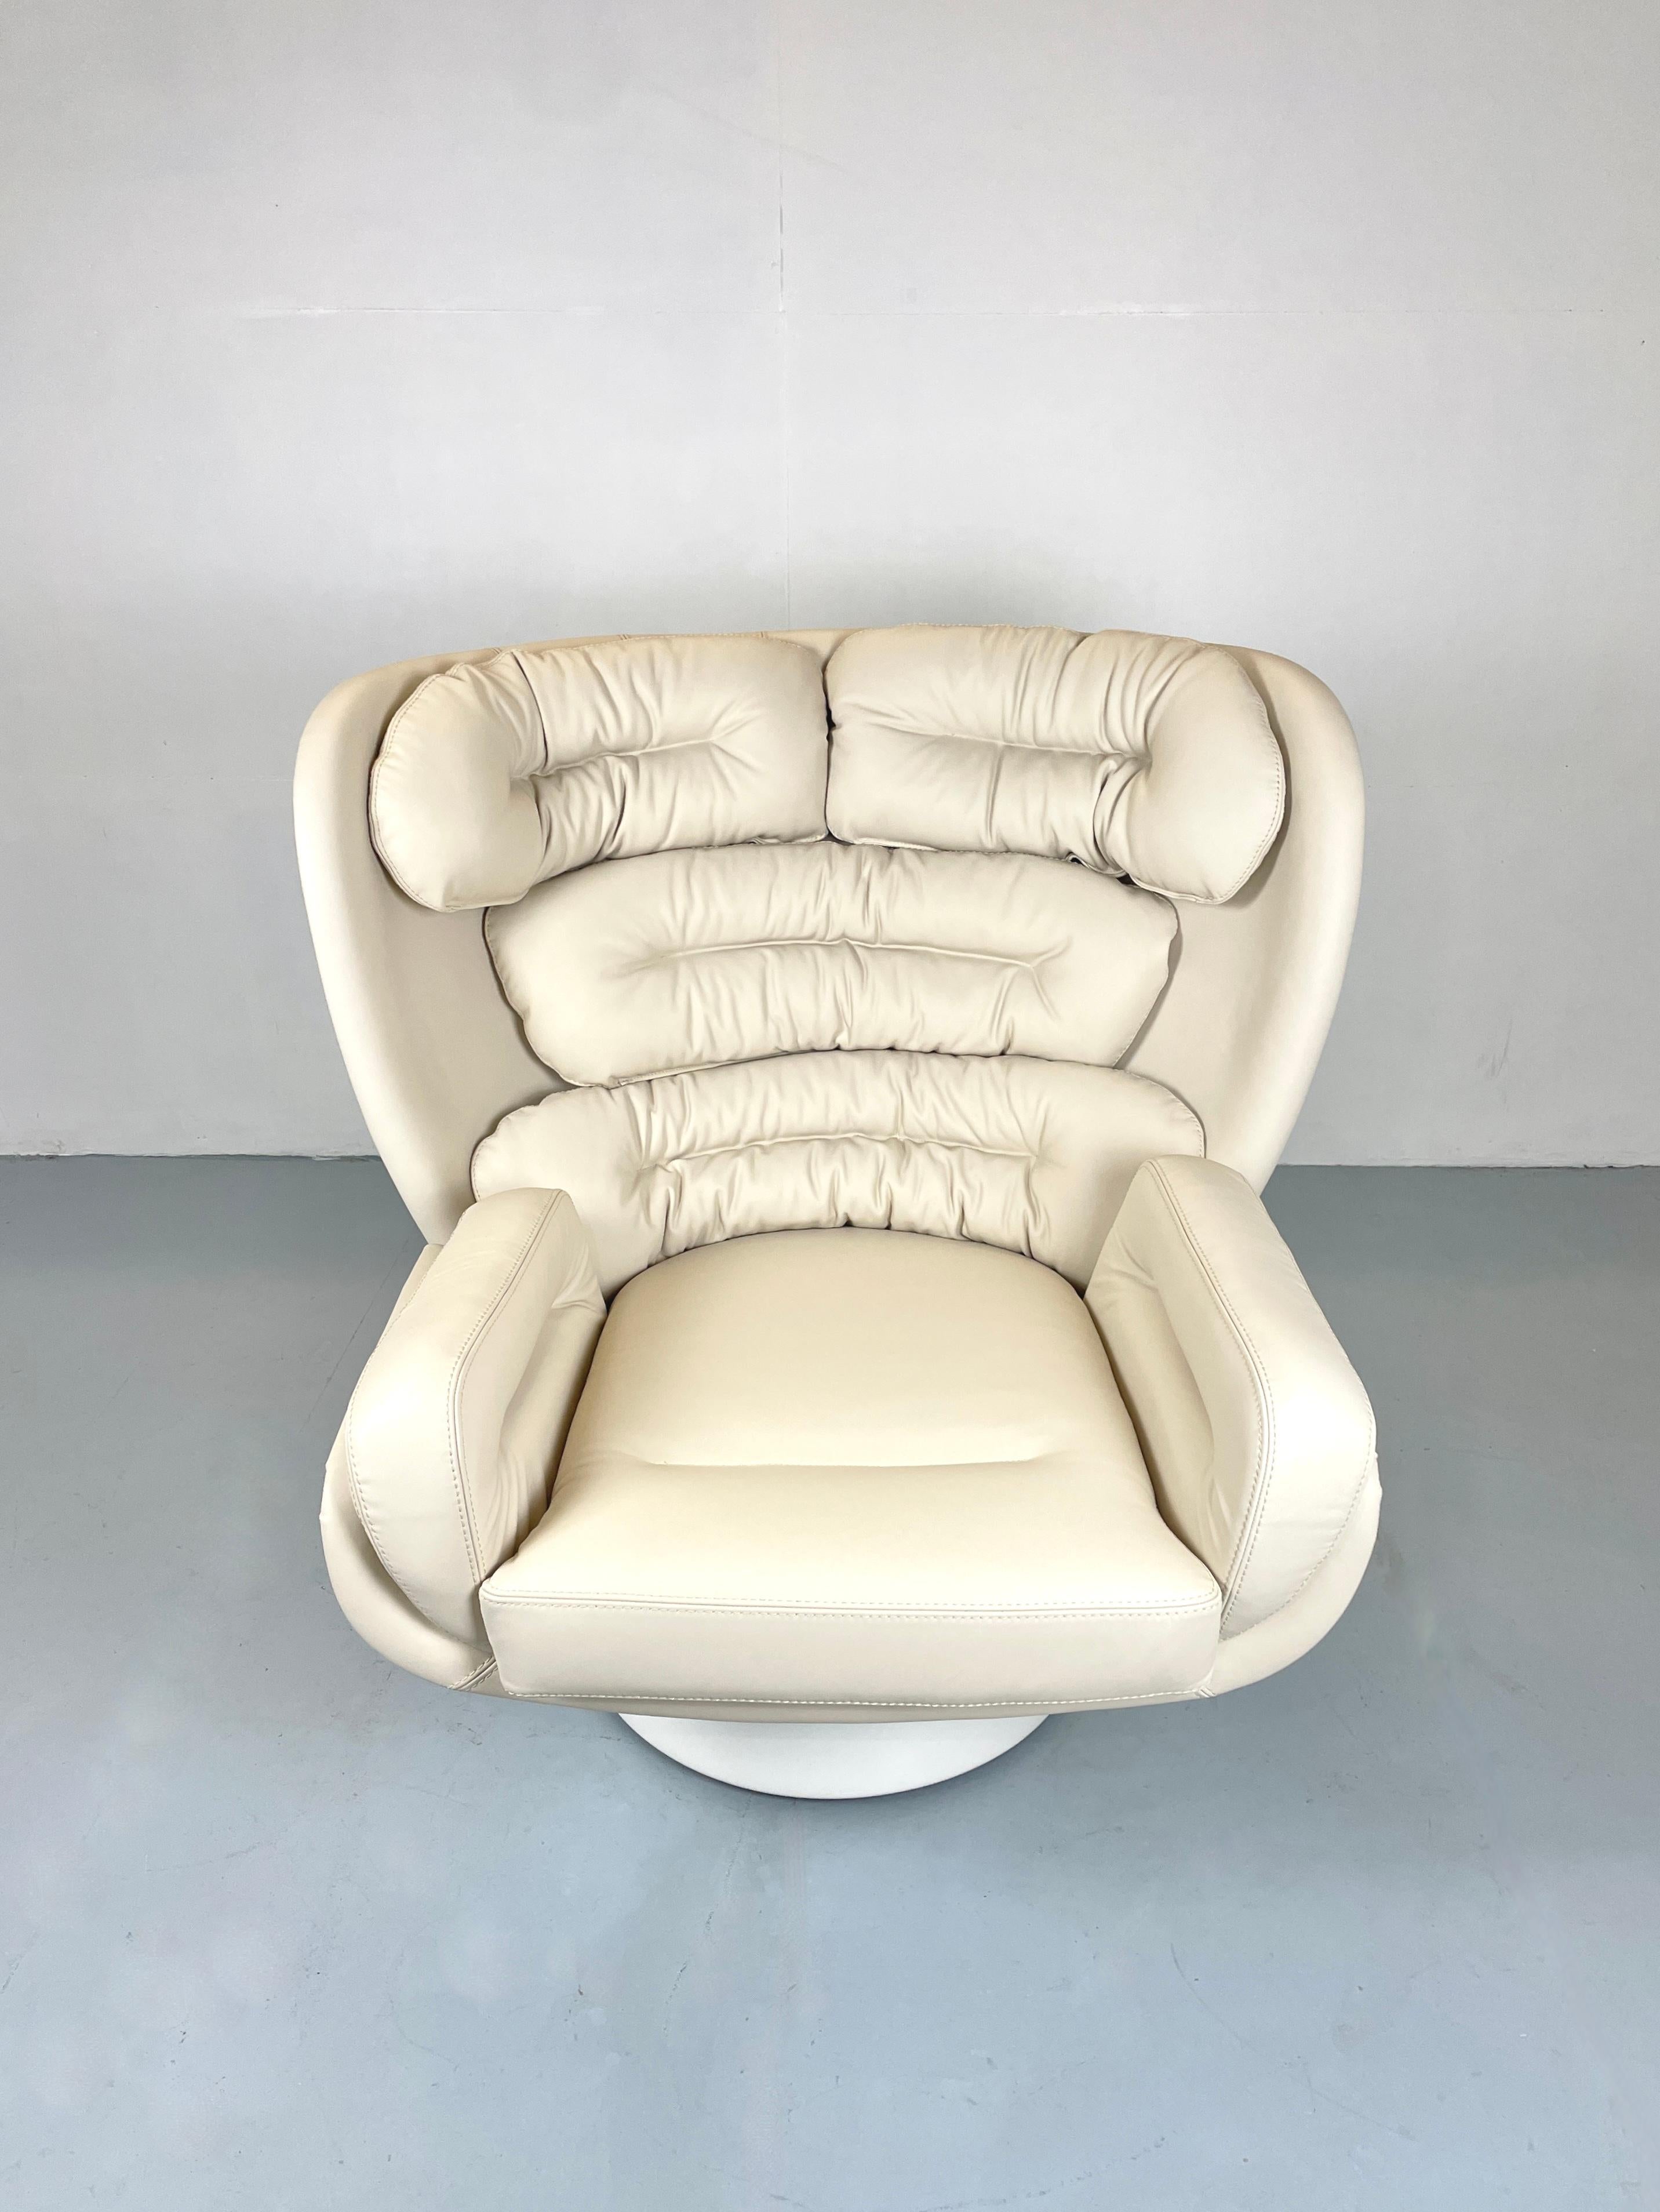 In 1964, Joe Colombo designed the Elda fibreglass armchair for Comfort - it has been produced unchanged in Italy ever since. 

We have currently Elda chairs in stock. They are immediately available. They come with original certificate and box.